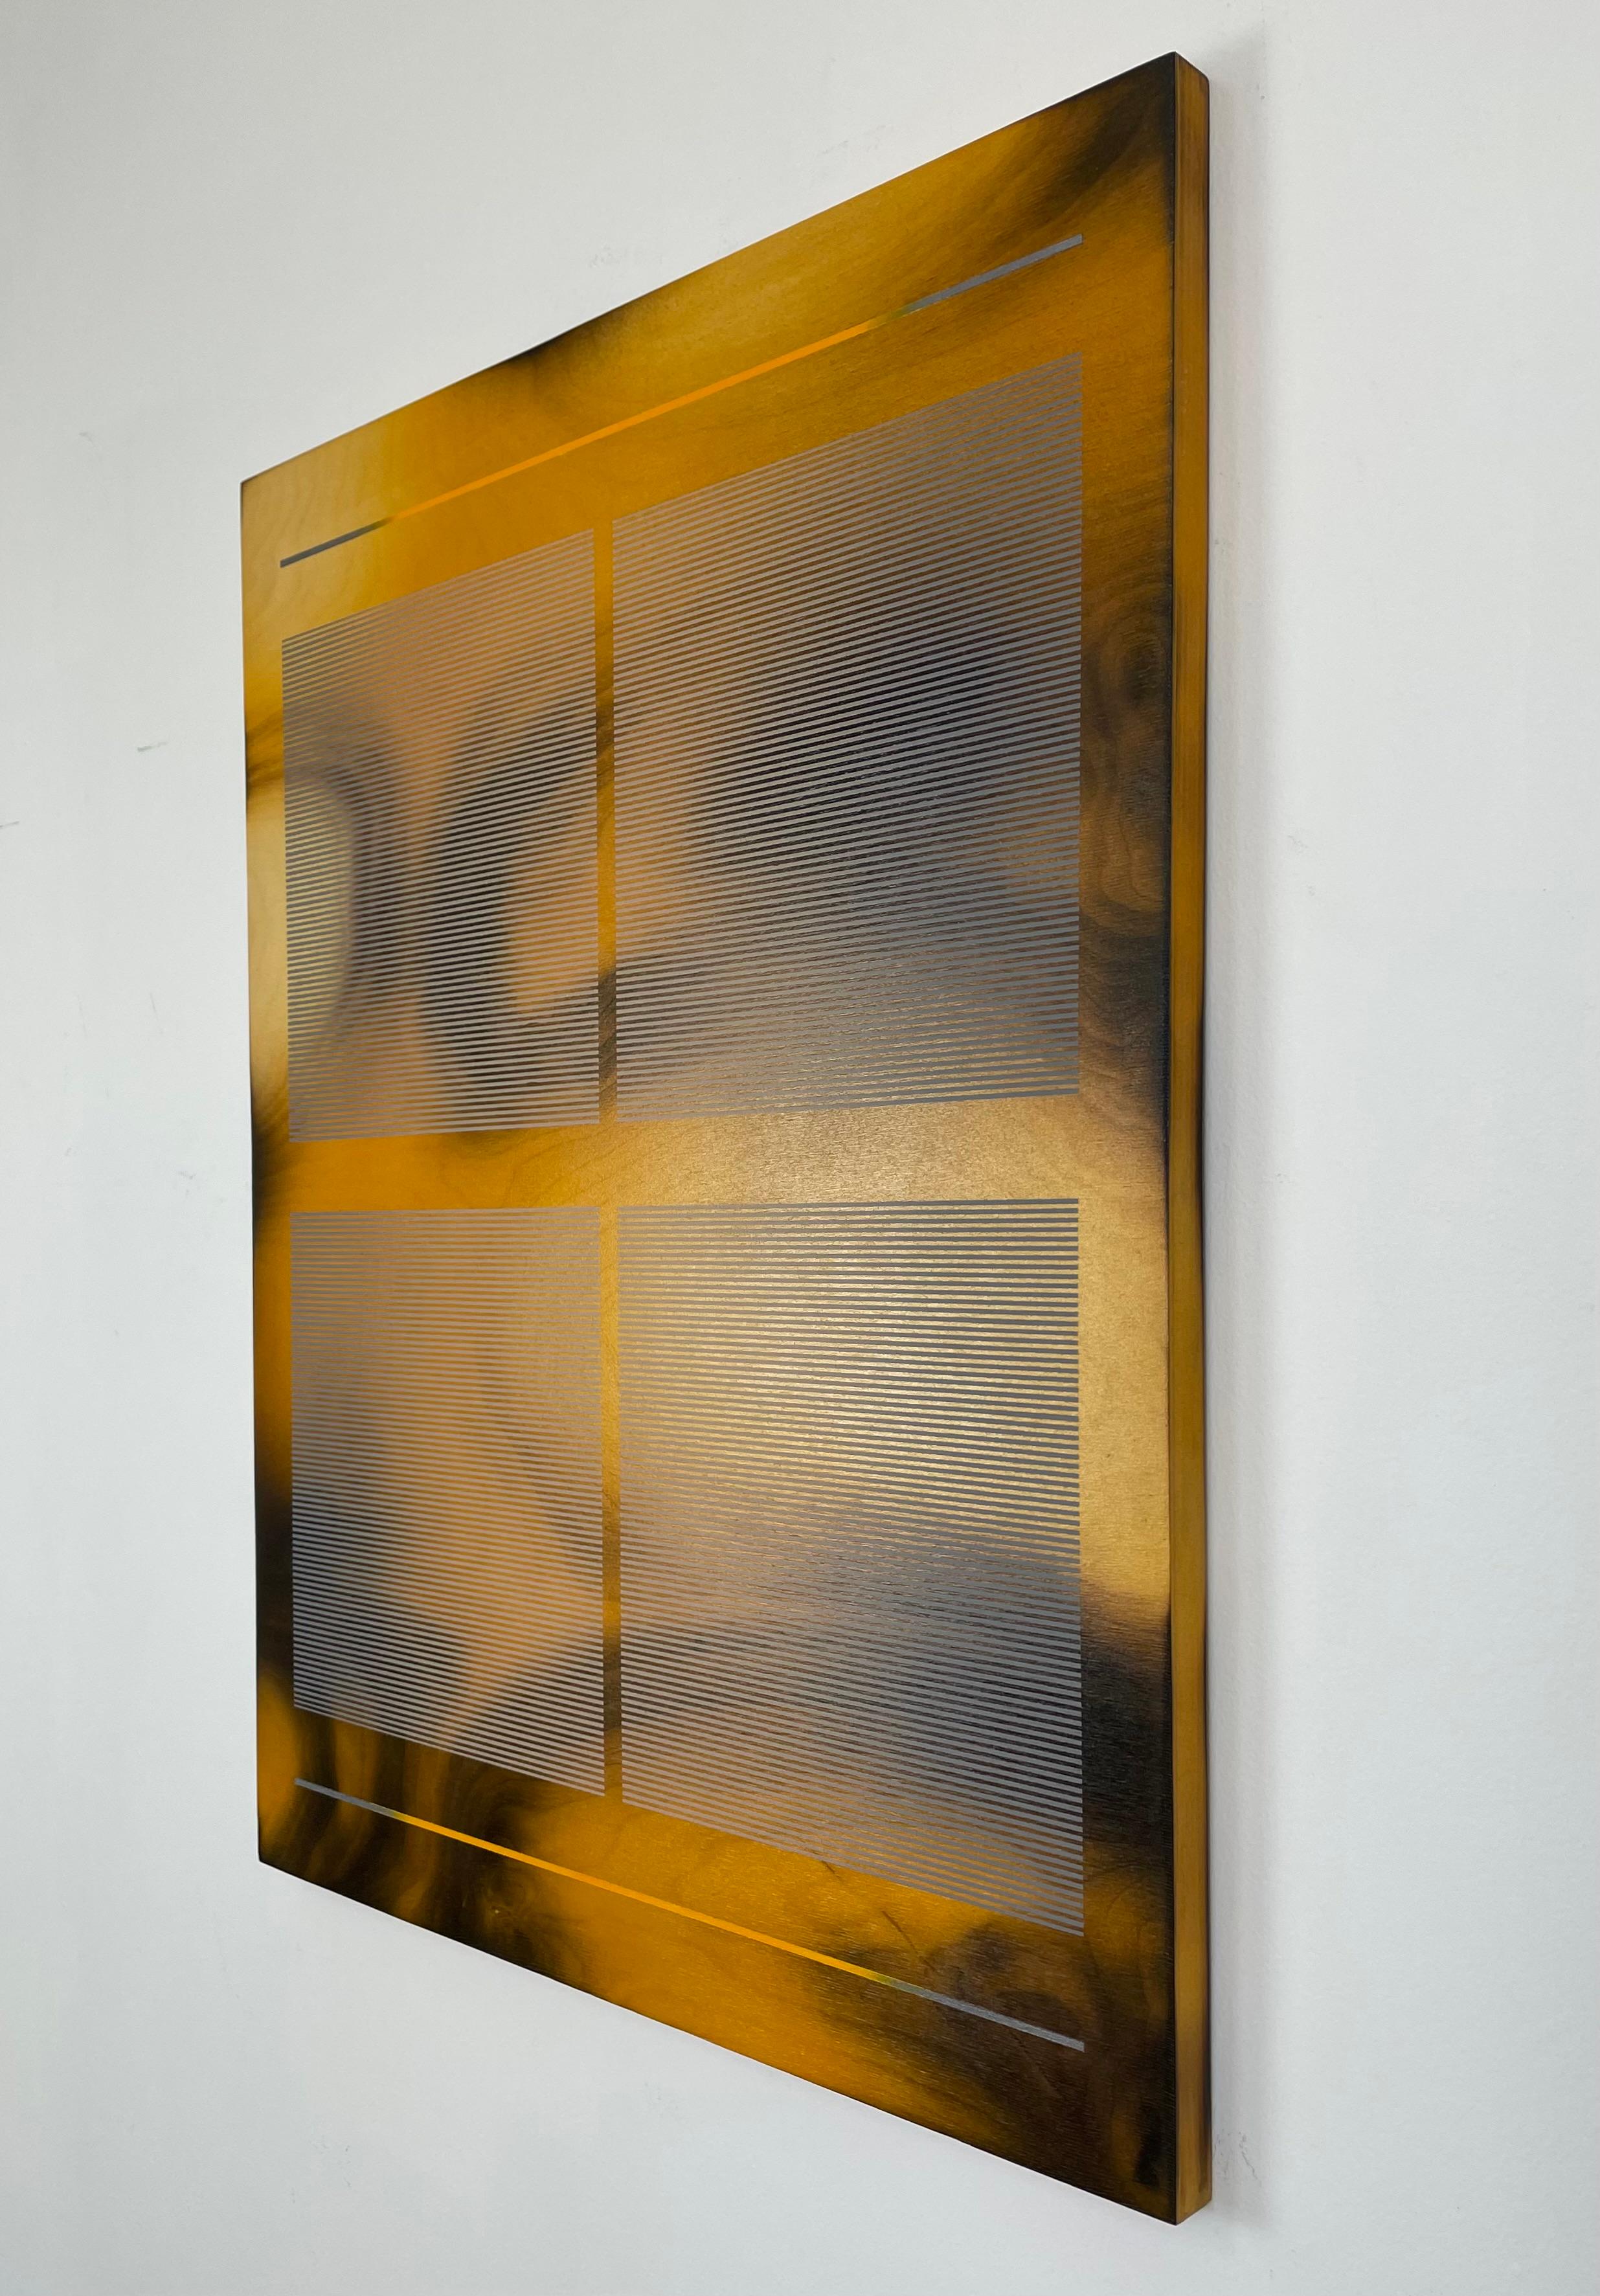 CSW 2024.7 (Sonnenstrahl gelbgold hour amber rythms sound waves grid painting) im Angebot 6